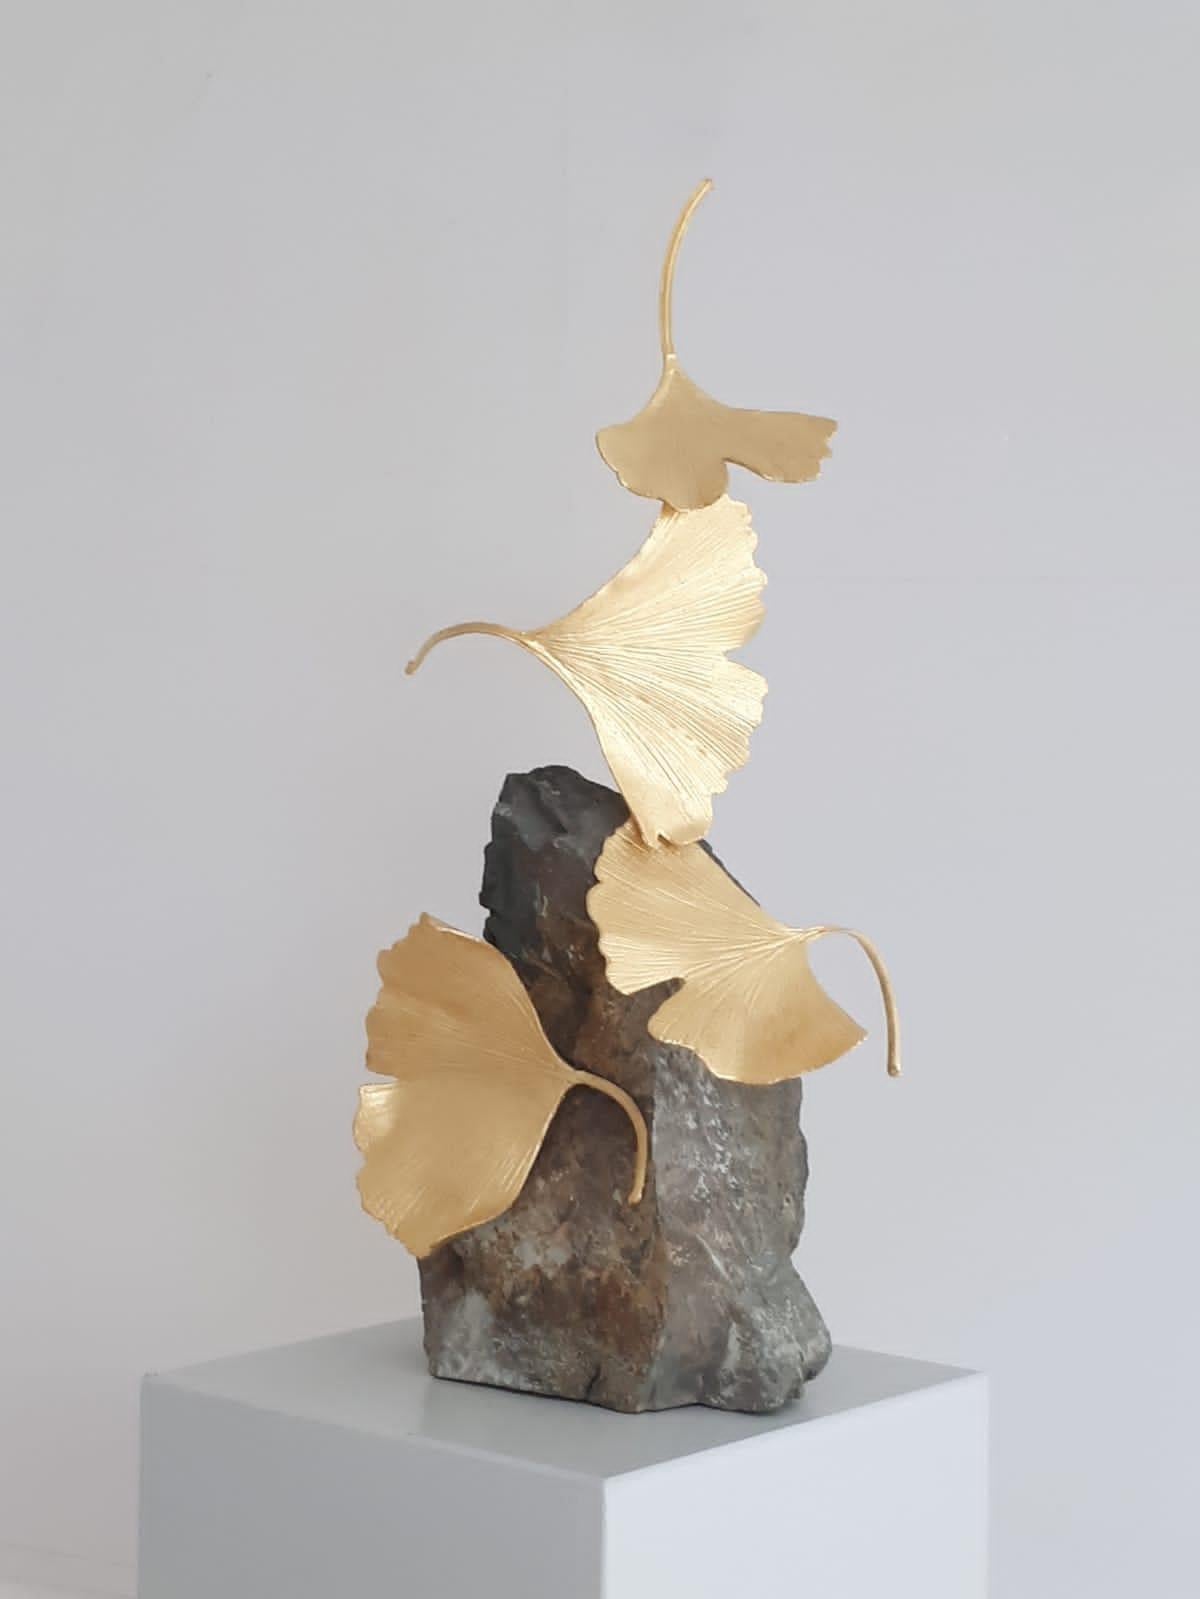 4 Leaf Stone Gingko by Kuno Vollet - Gilded Brass Gingko sculpture on stone base For Sale 3